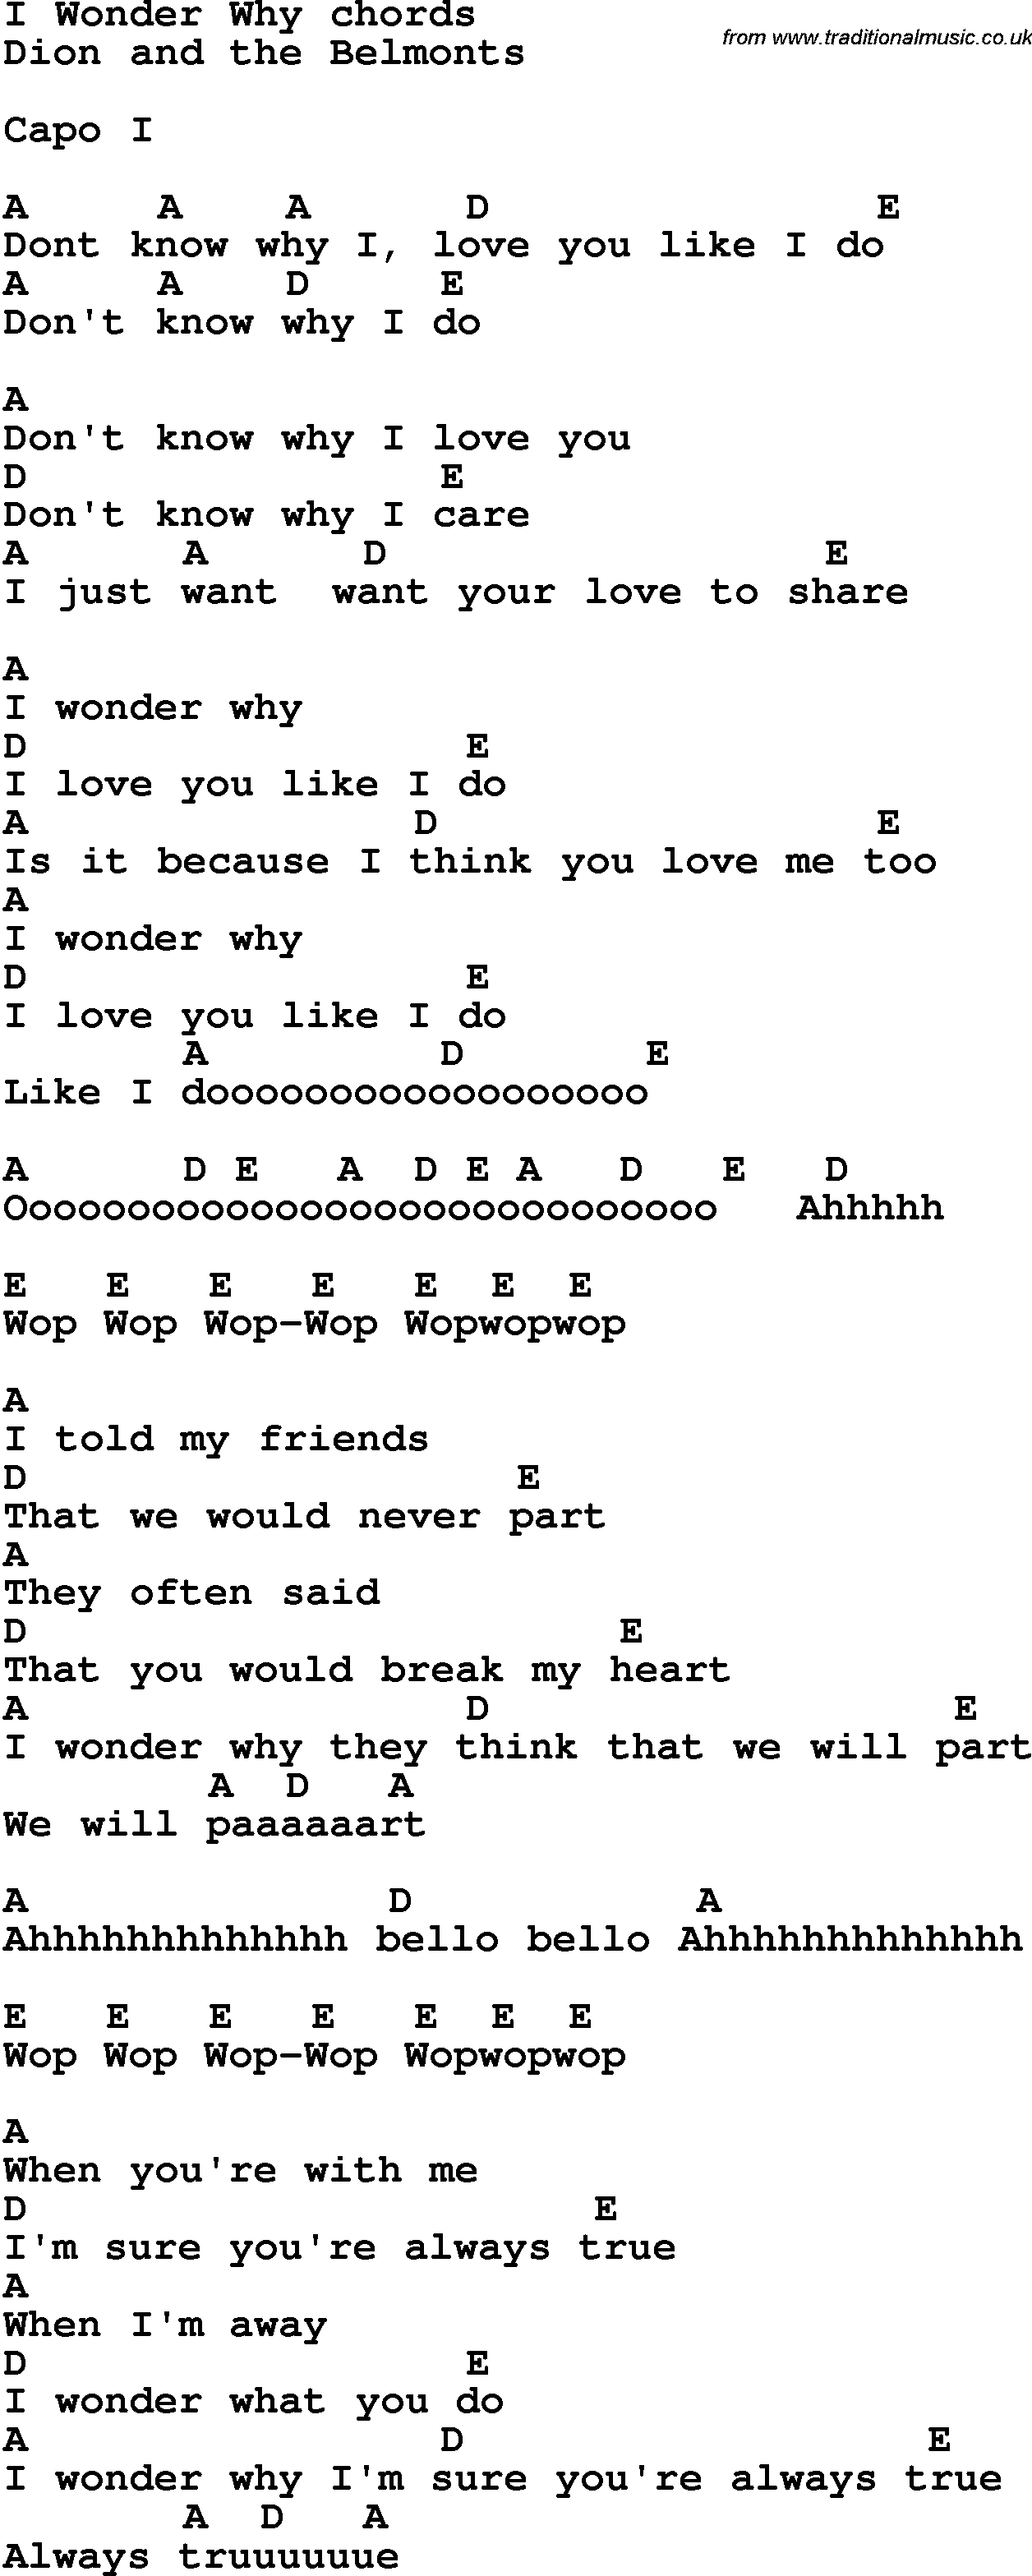 Song Lyrics with guitar chords for I Wonder Why